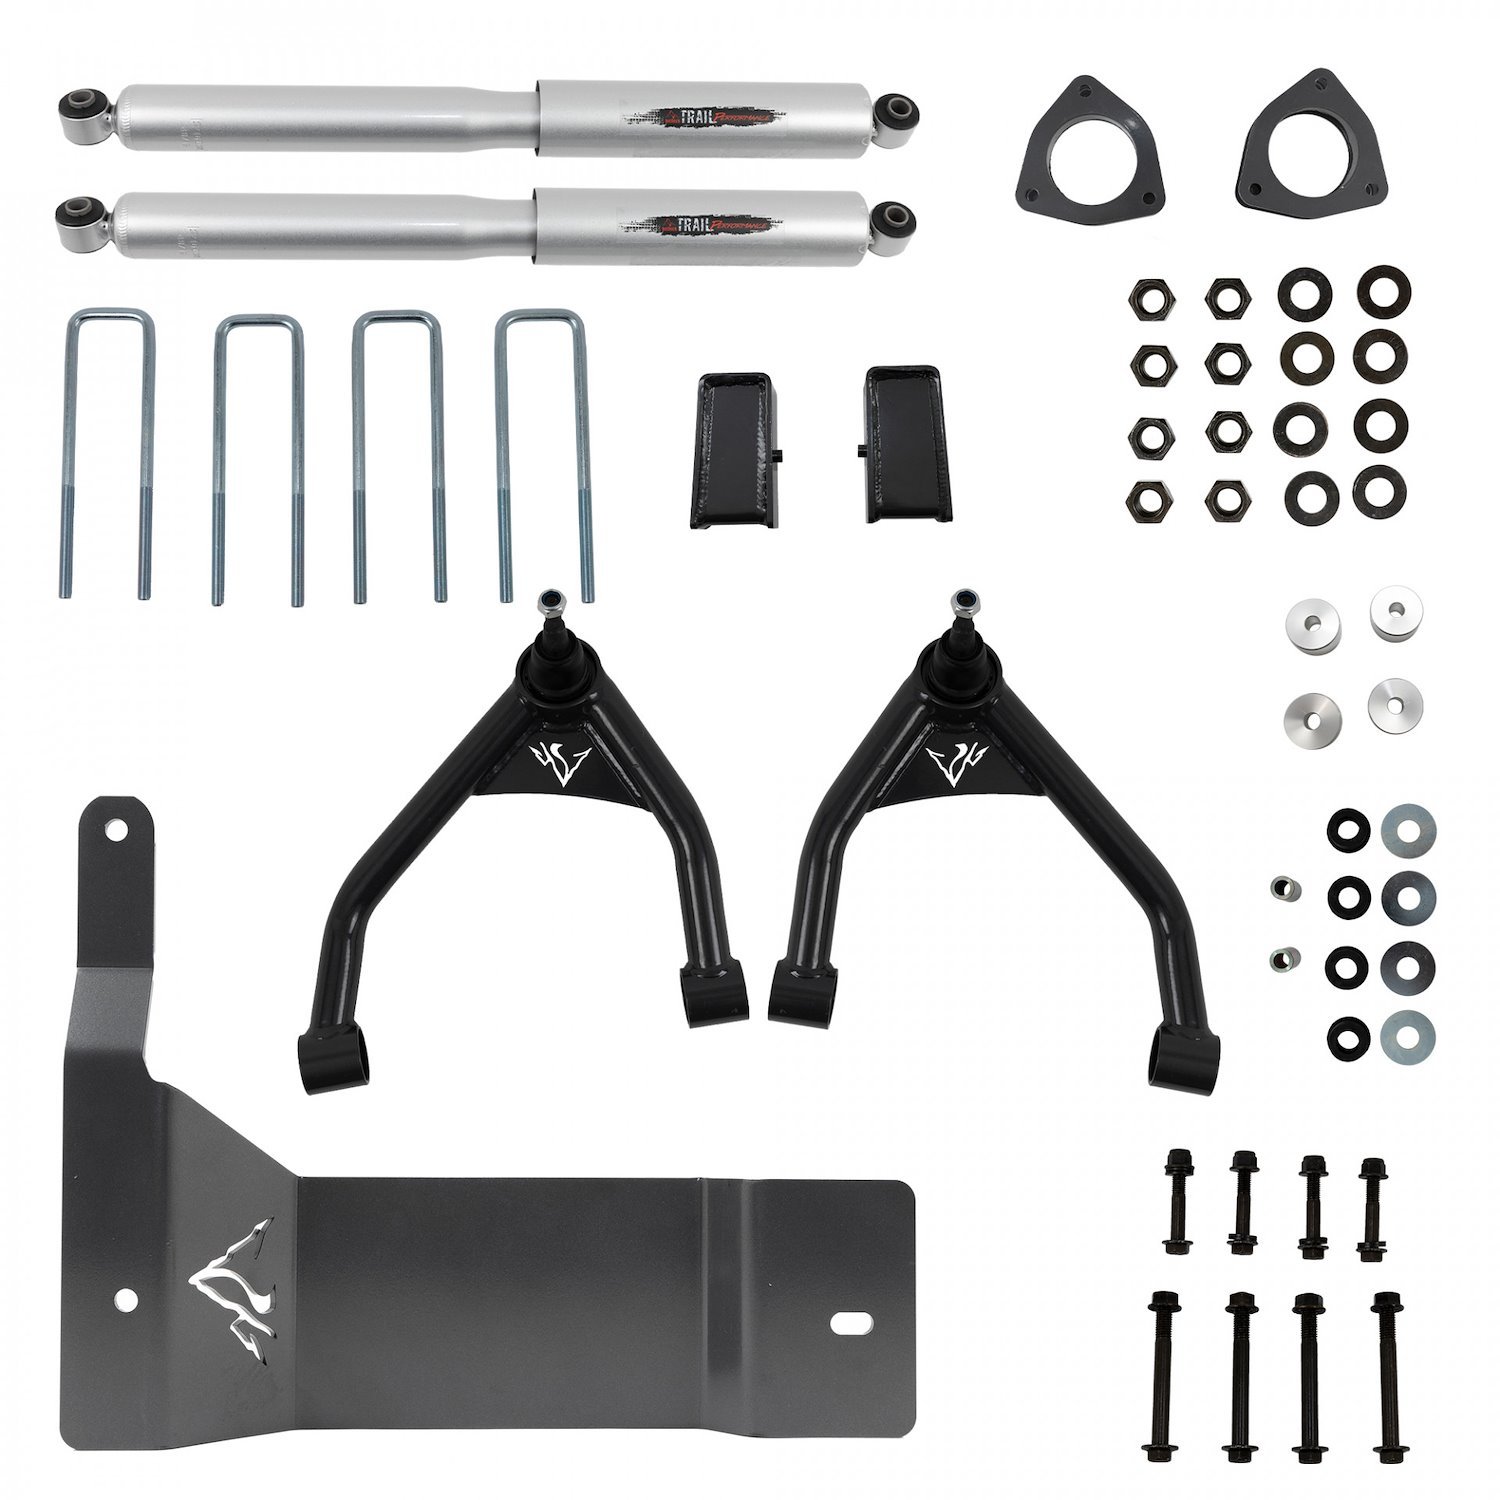 4 in. Suspension Lift Kit for 2014-2016 Chevy Silverado, GMC Sierra 1500 Truck 4WD/RWD (Crew/Extended Cab)